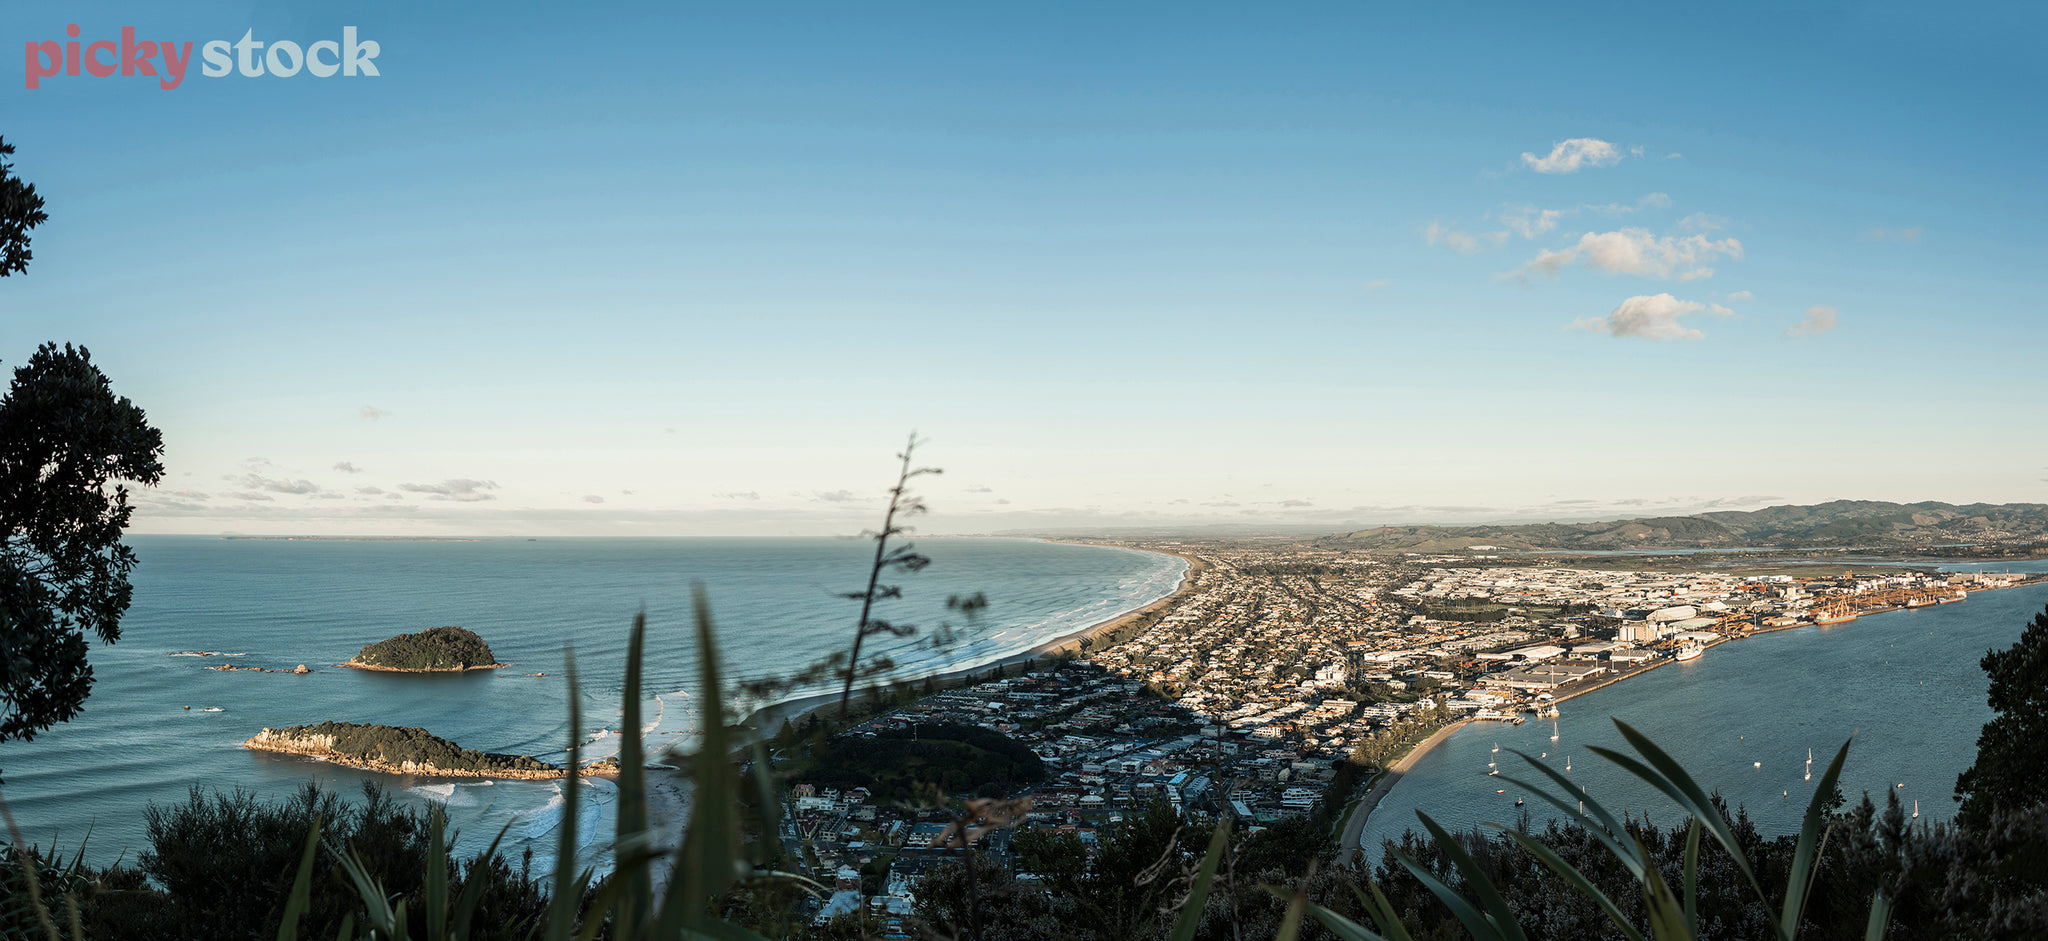 View from the Mount in Tauranga, a hill which overlooks a port, and residential development